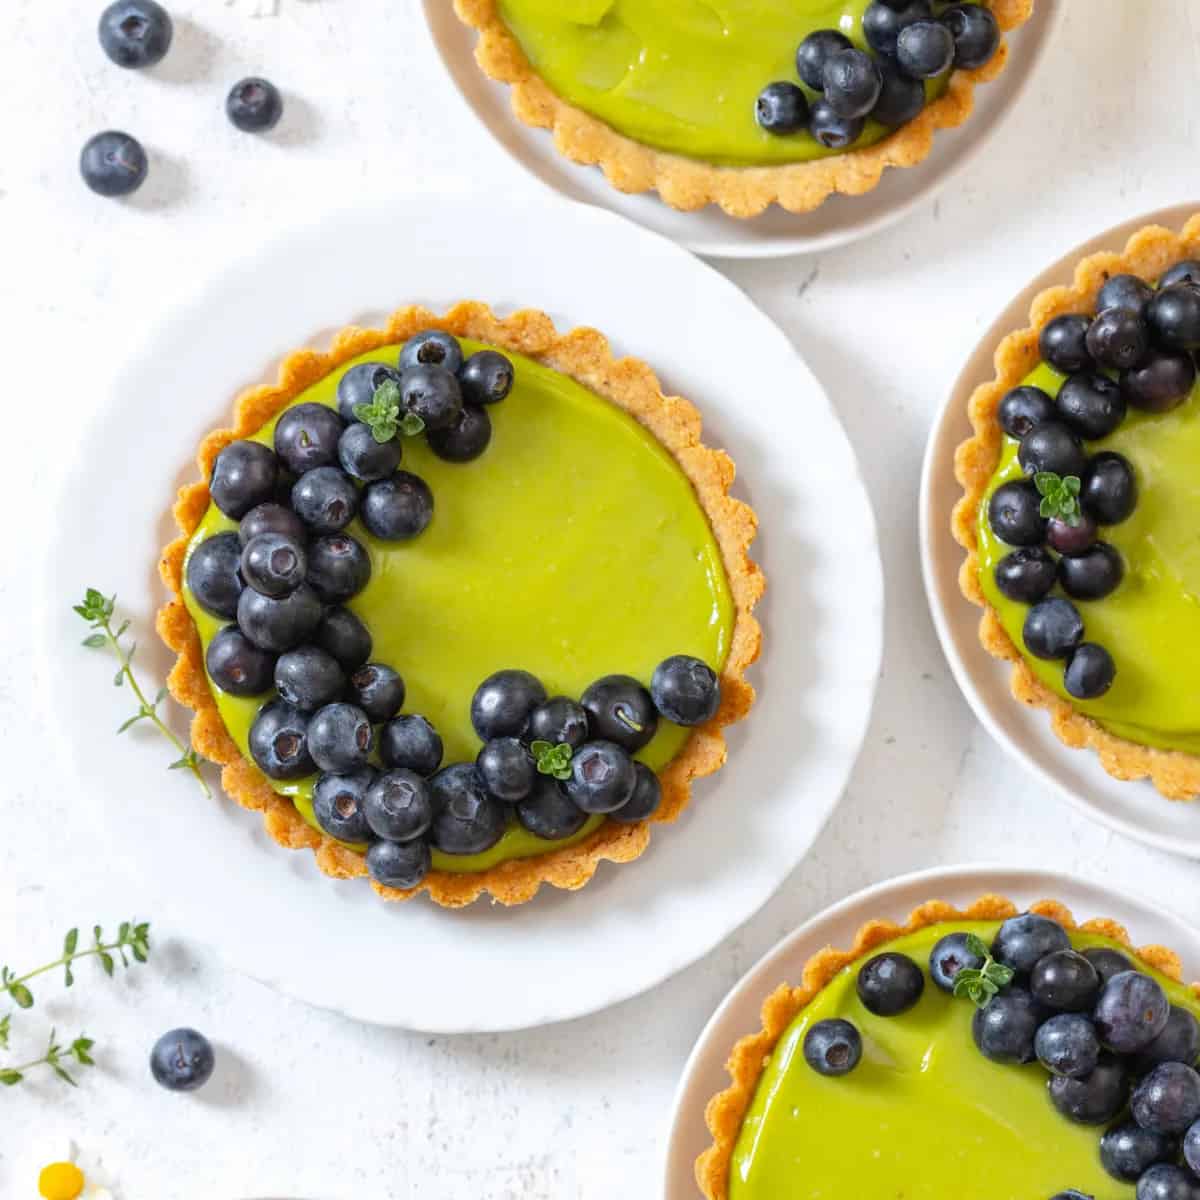 Avocado Blueberry Tarts with Almond Crust from Baking the Goods